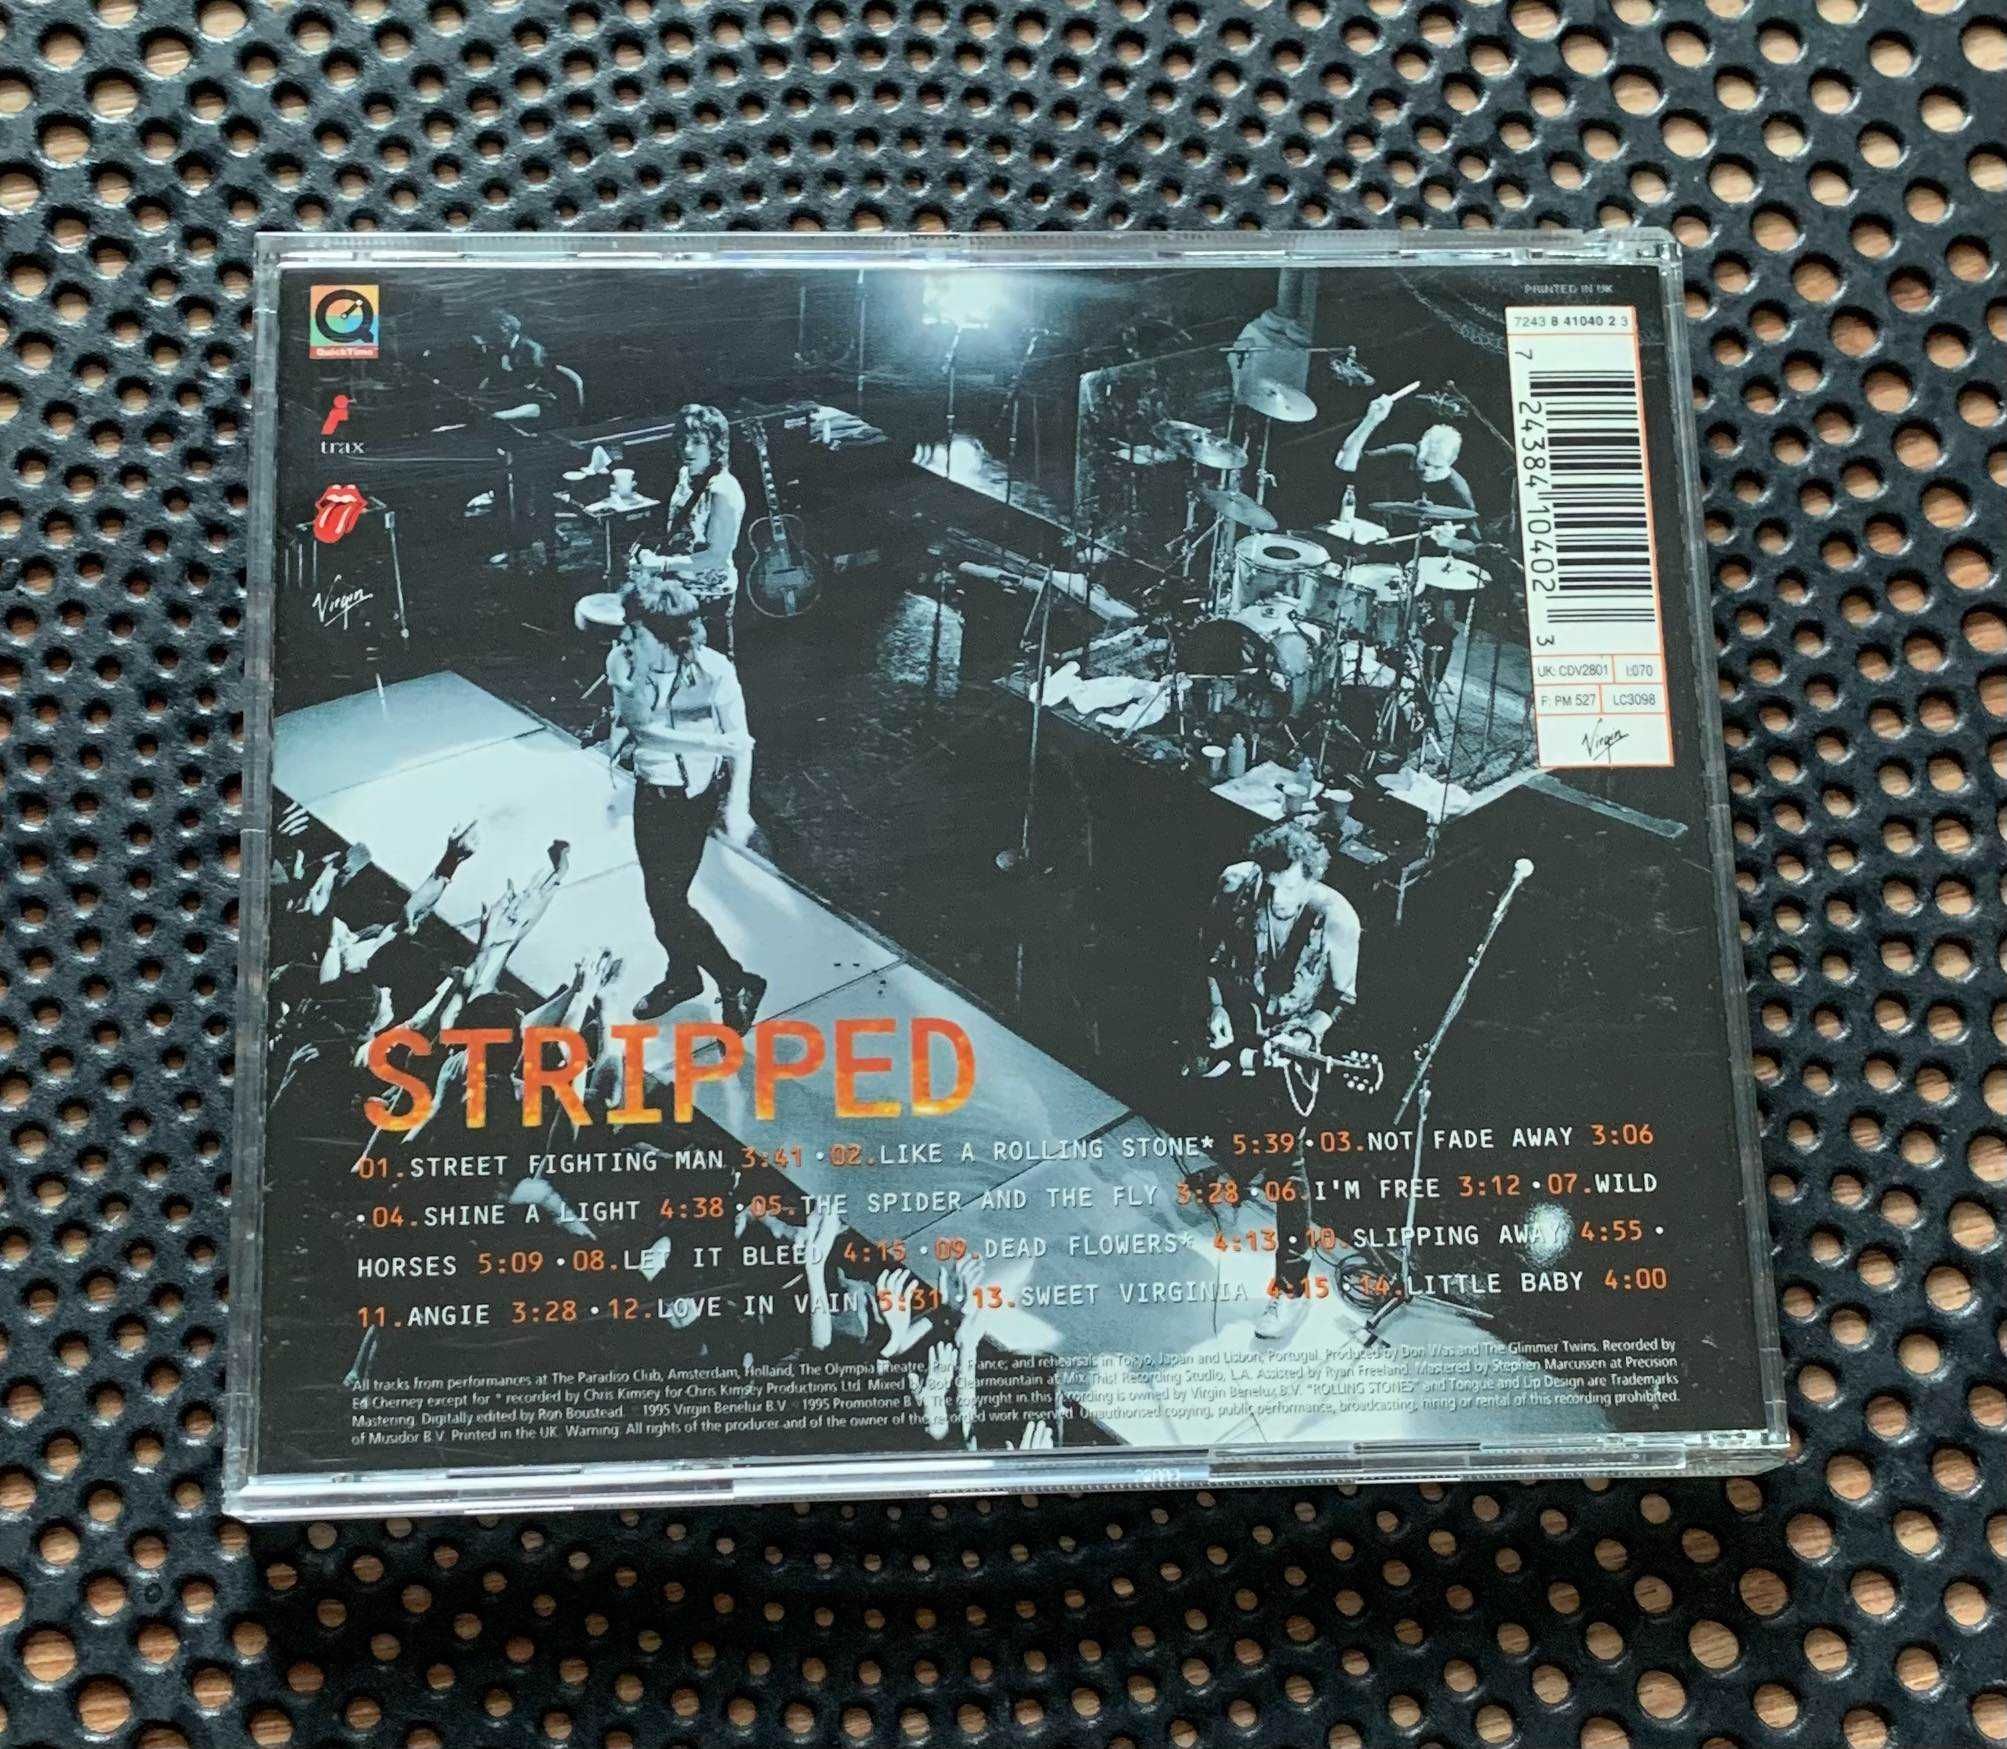 The Rolling Stones - Stripped - Jewelcase CD